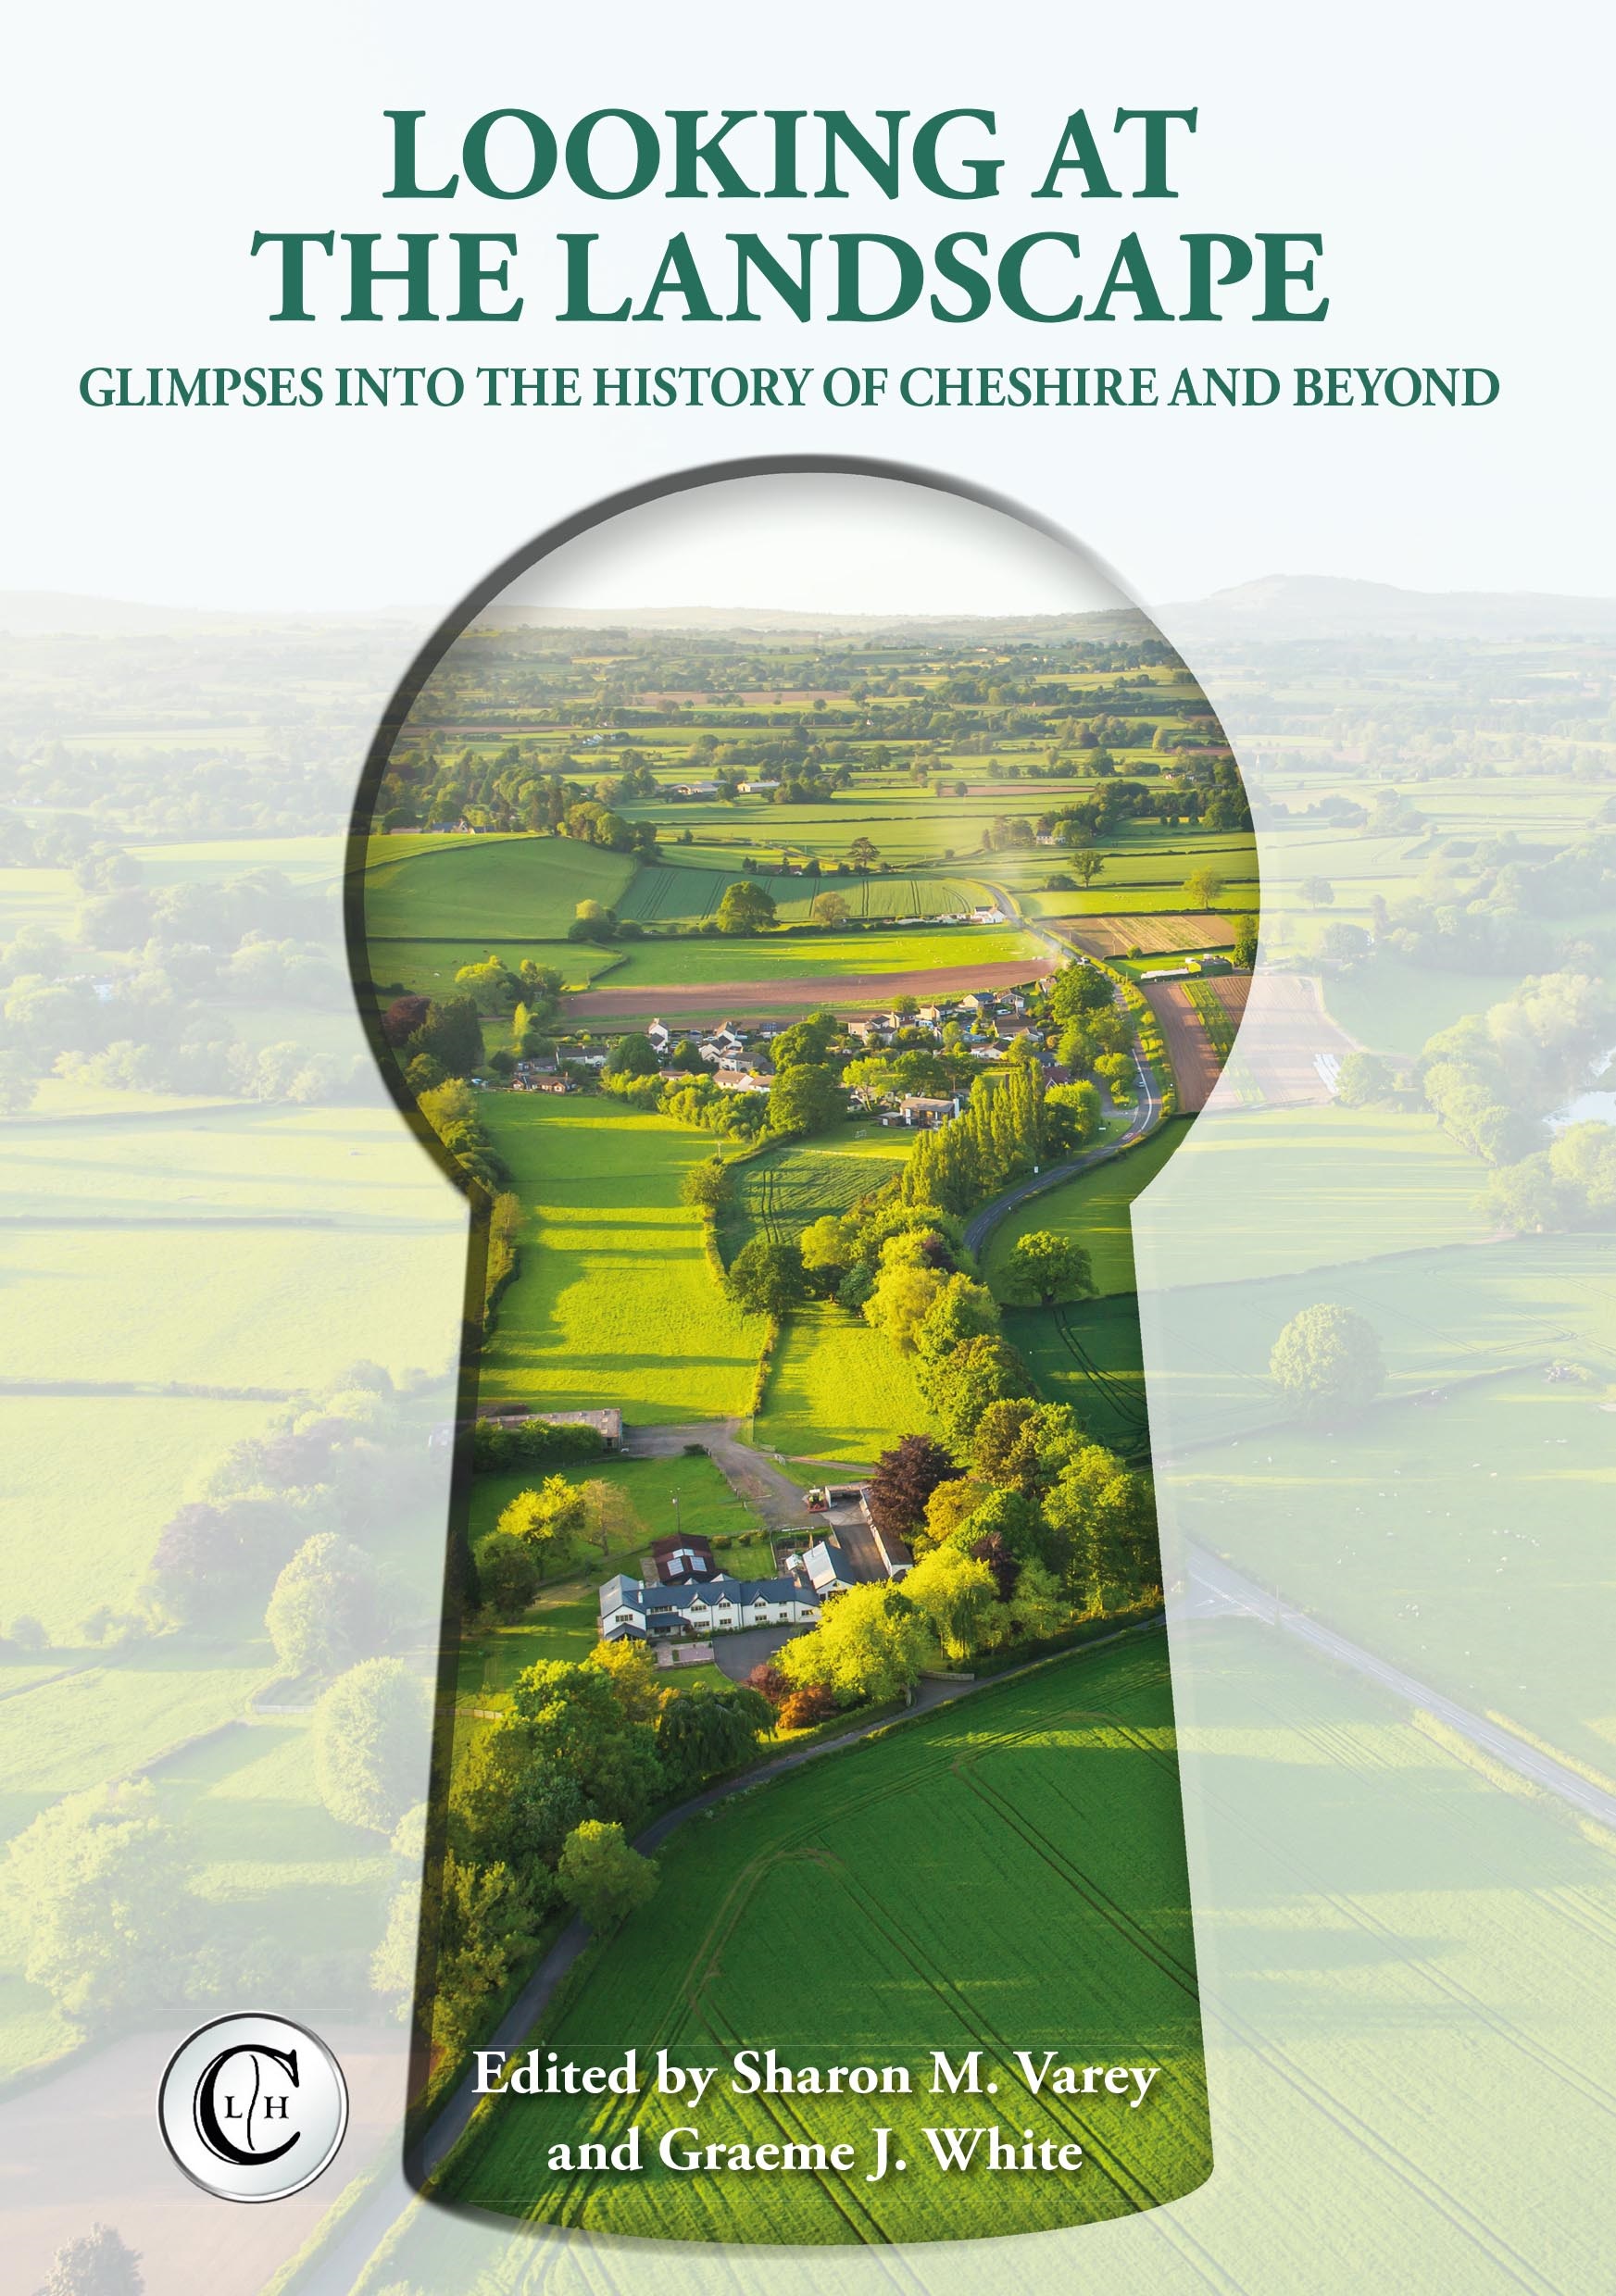 Looking at the Landscape: Glimpses into the History of Cheshire and Beyond